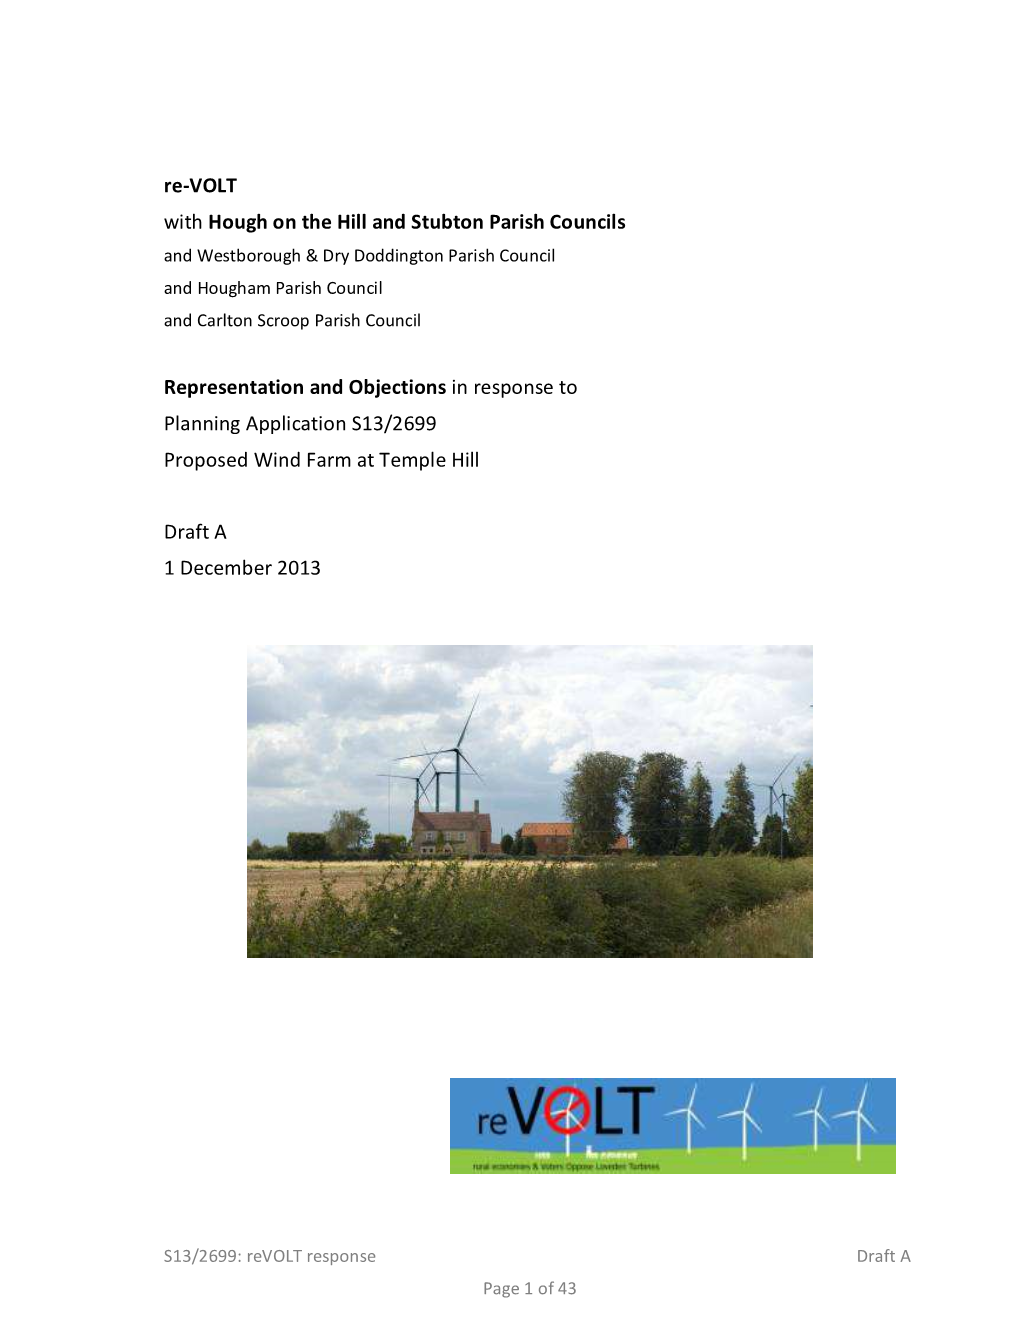 Re-VOLT with Hough on the Hill and Stubton Parish Councils